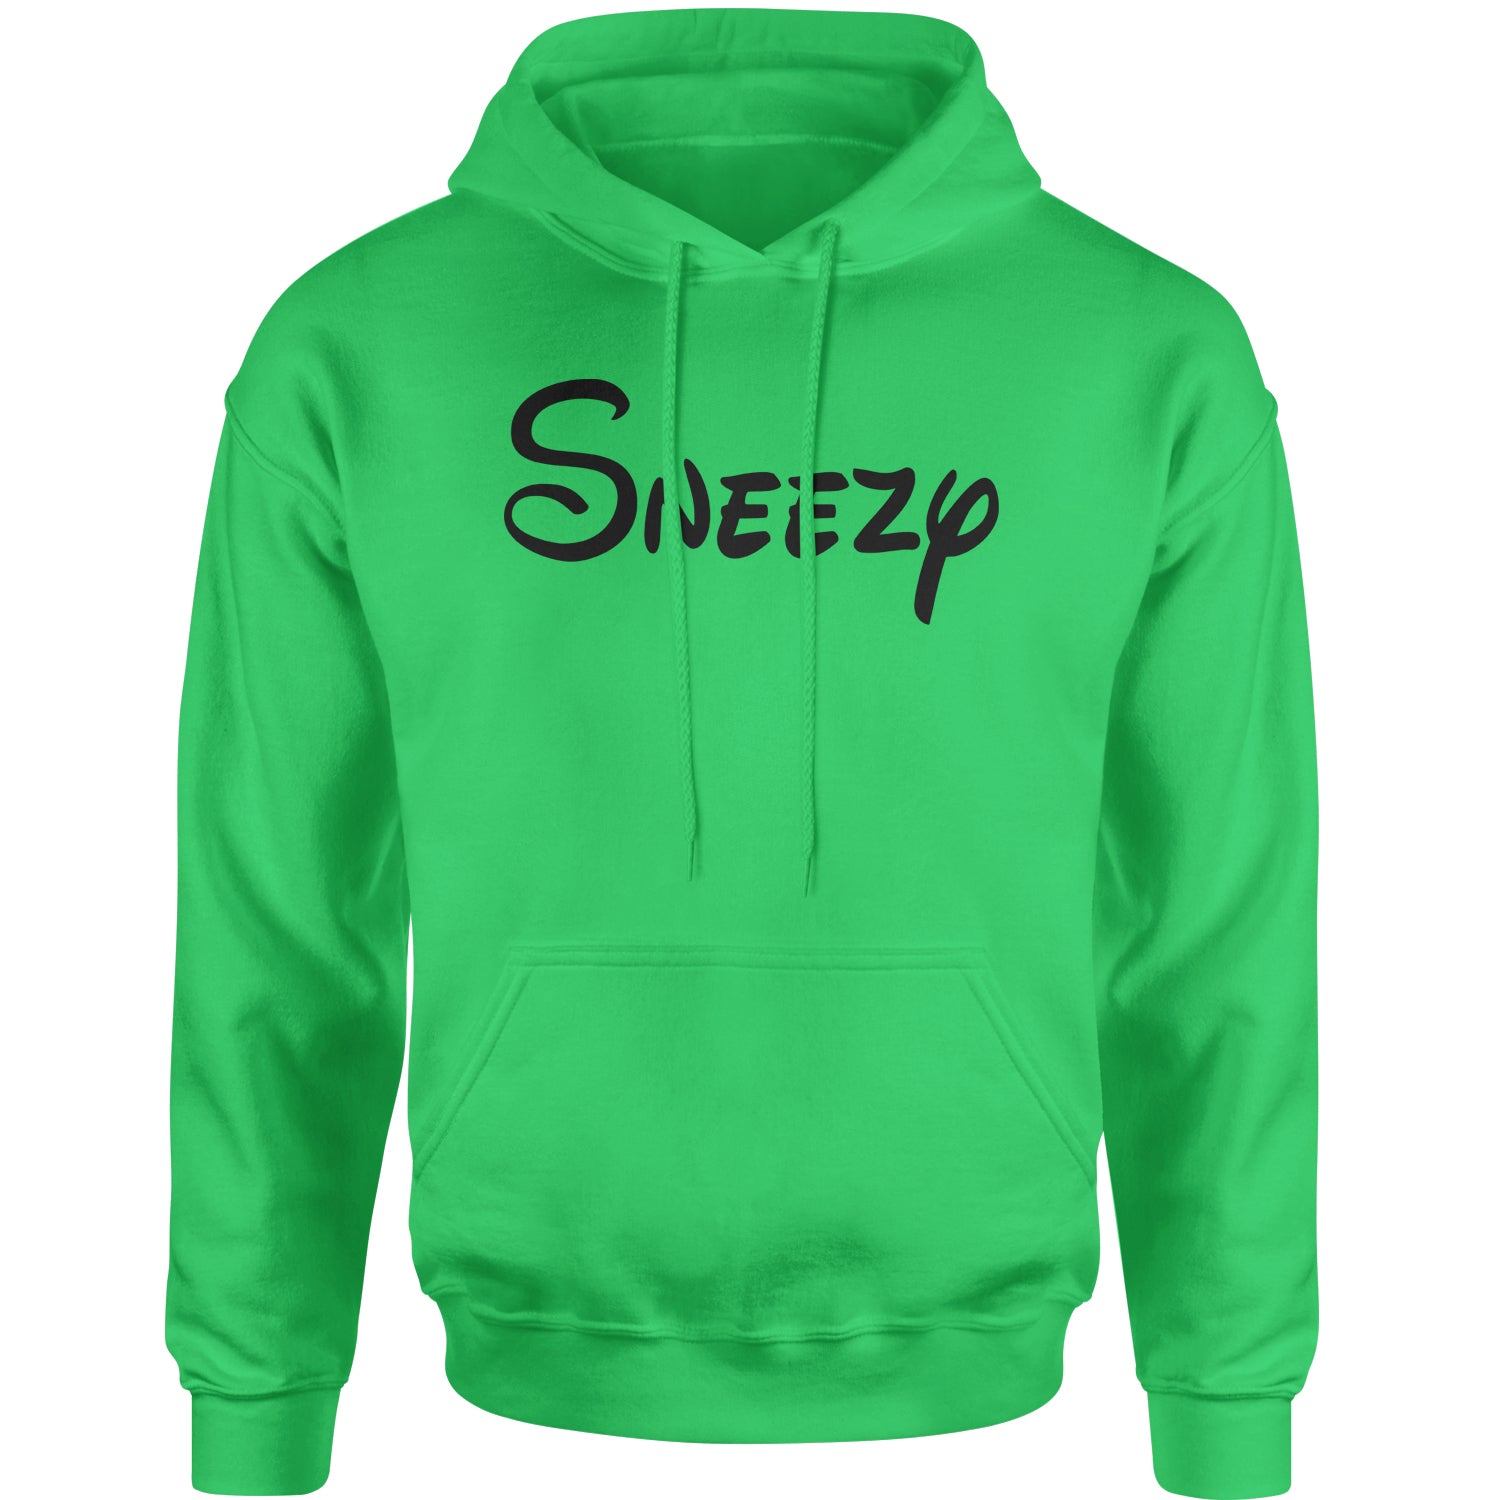 Sneezy - 7 Dwarfs Costume Adult Hoodie Sweatshirt and, costume, dwarfs, group, halloween, matching, seven, snow, the, white by Expression Tees